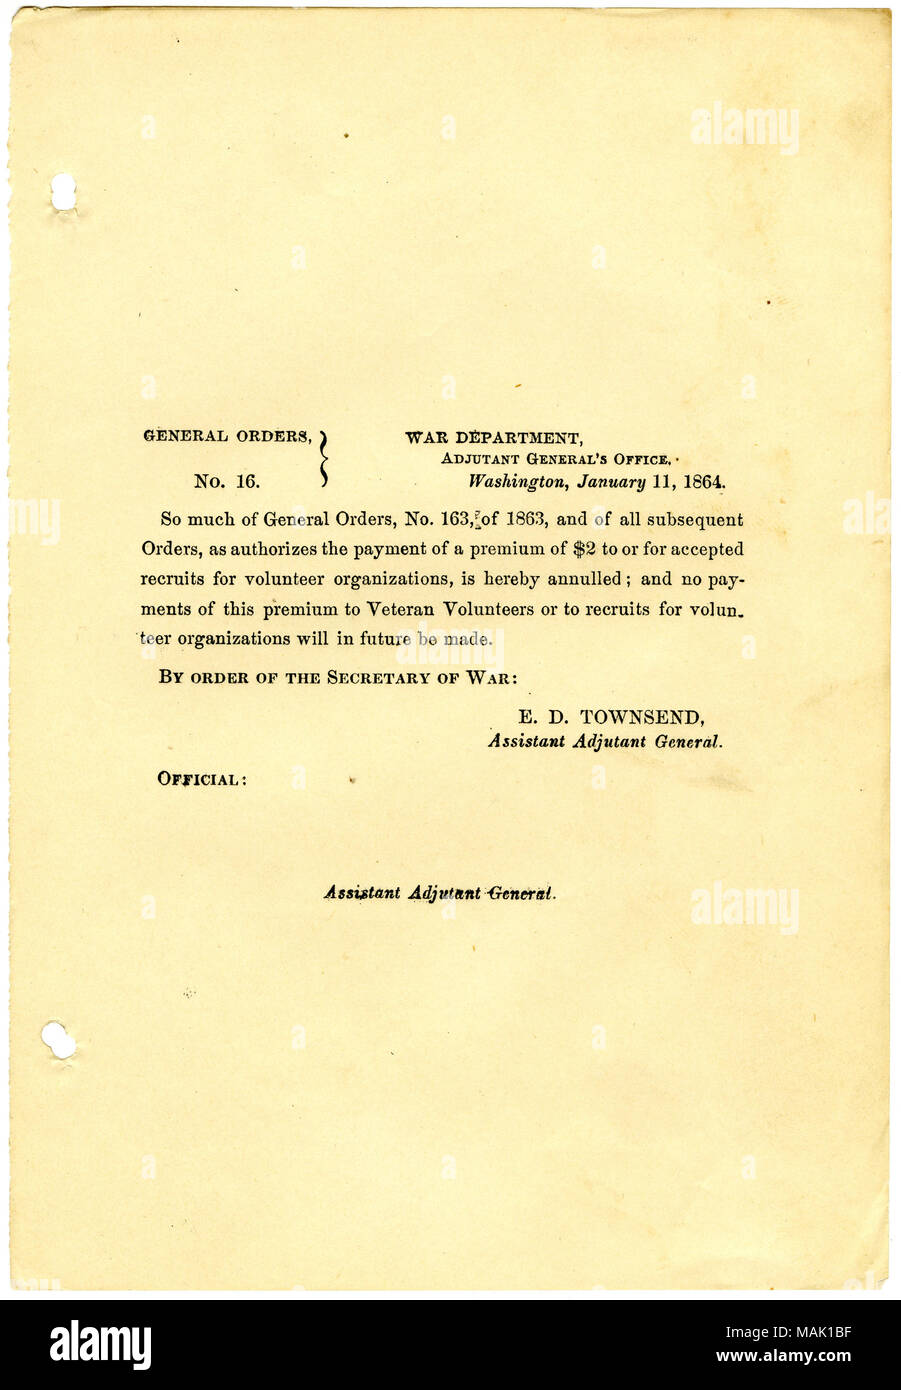 Annul part of General Orders, No. 163 of 1863, which authorizes the payment of $2 to accepted recruits for volunteer organizations. Title: General Orders, No. 16, War Department, Adjutant General's Office, Washington, January 11, 1864  . 11 January 1864. Townsend, E. D. (Edward Davis), 1817-1893 Stock Photo